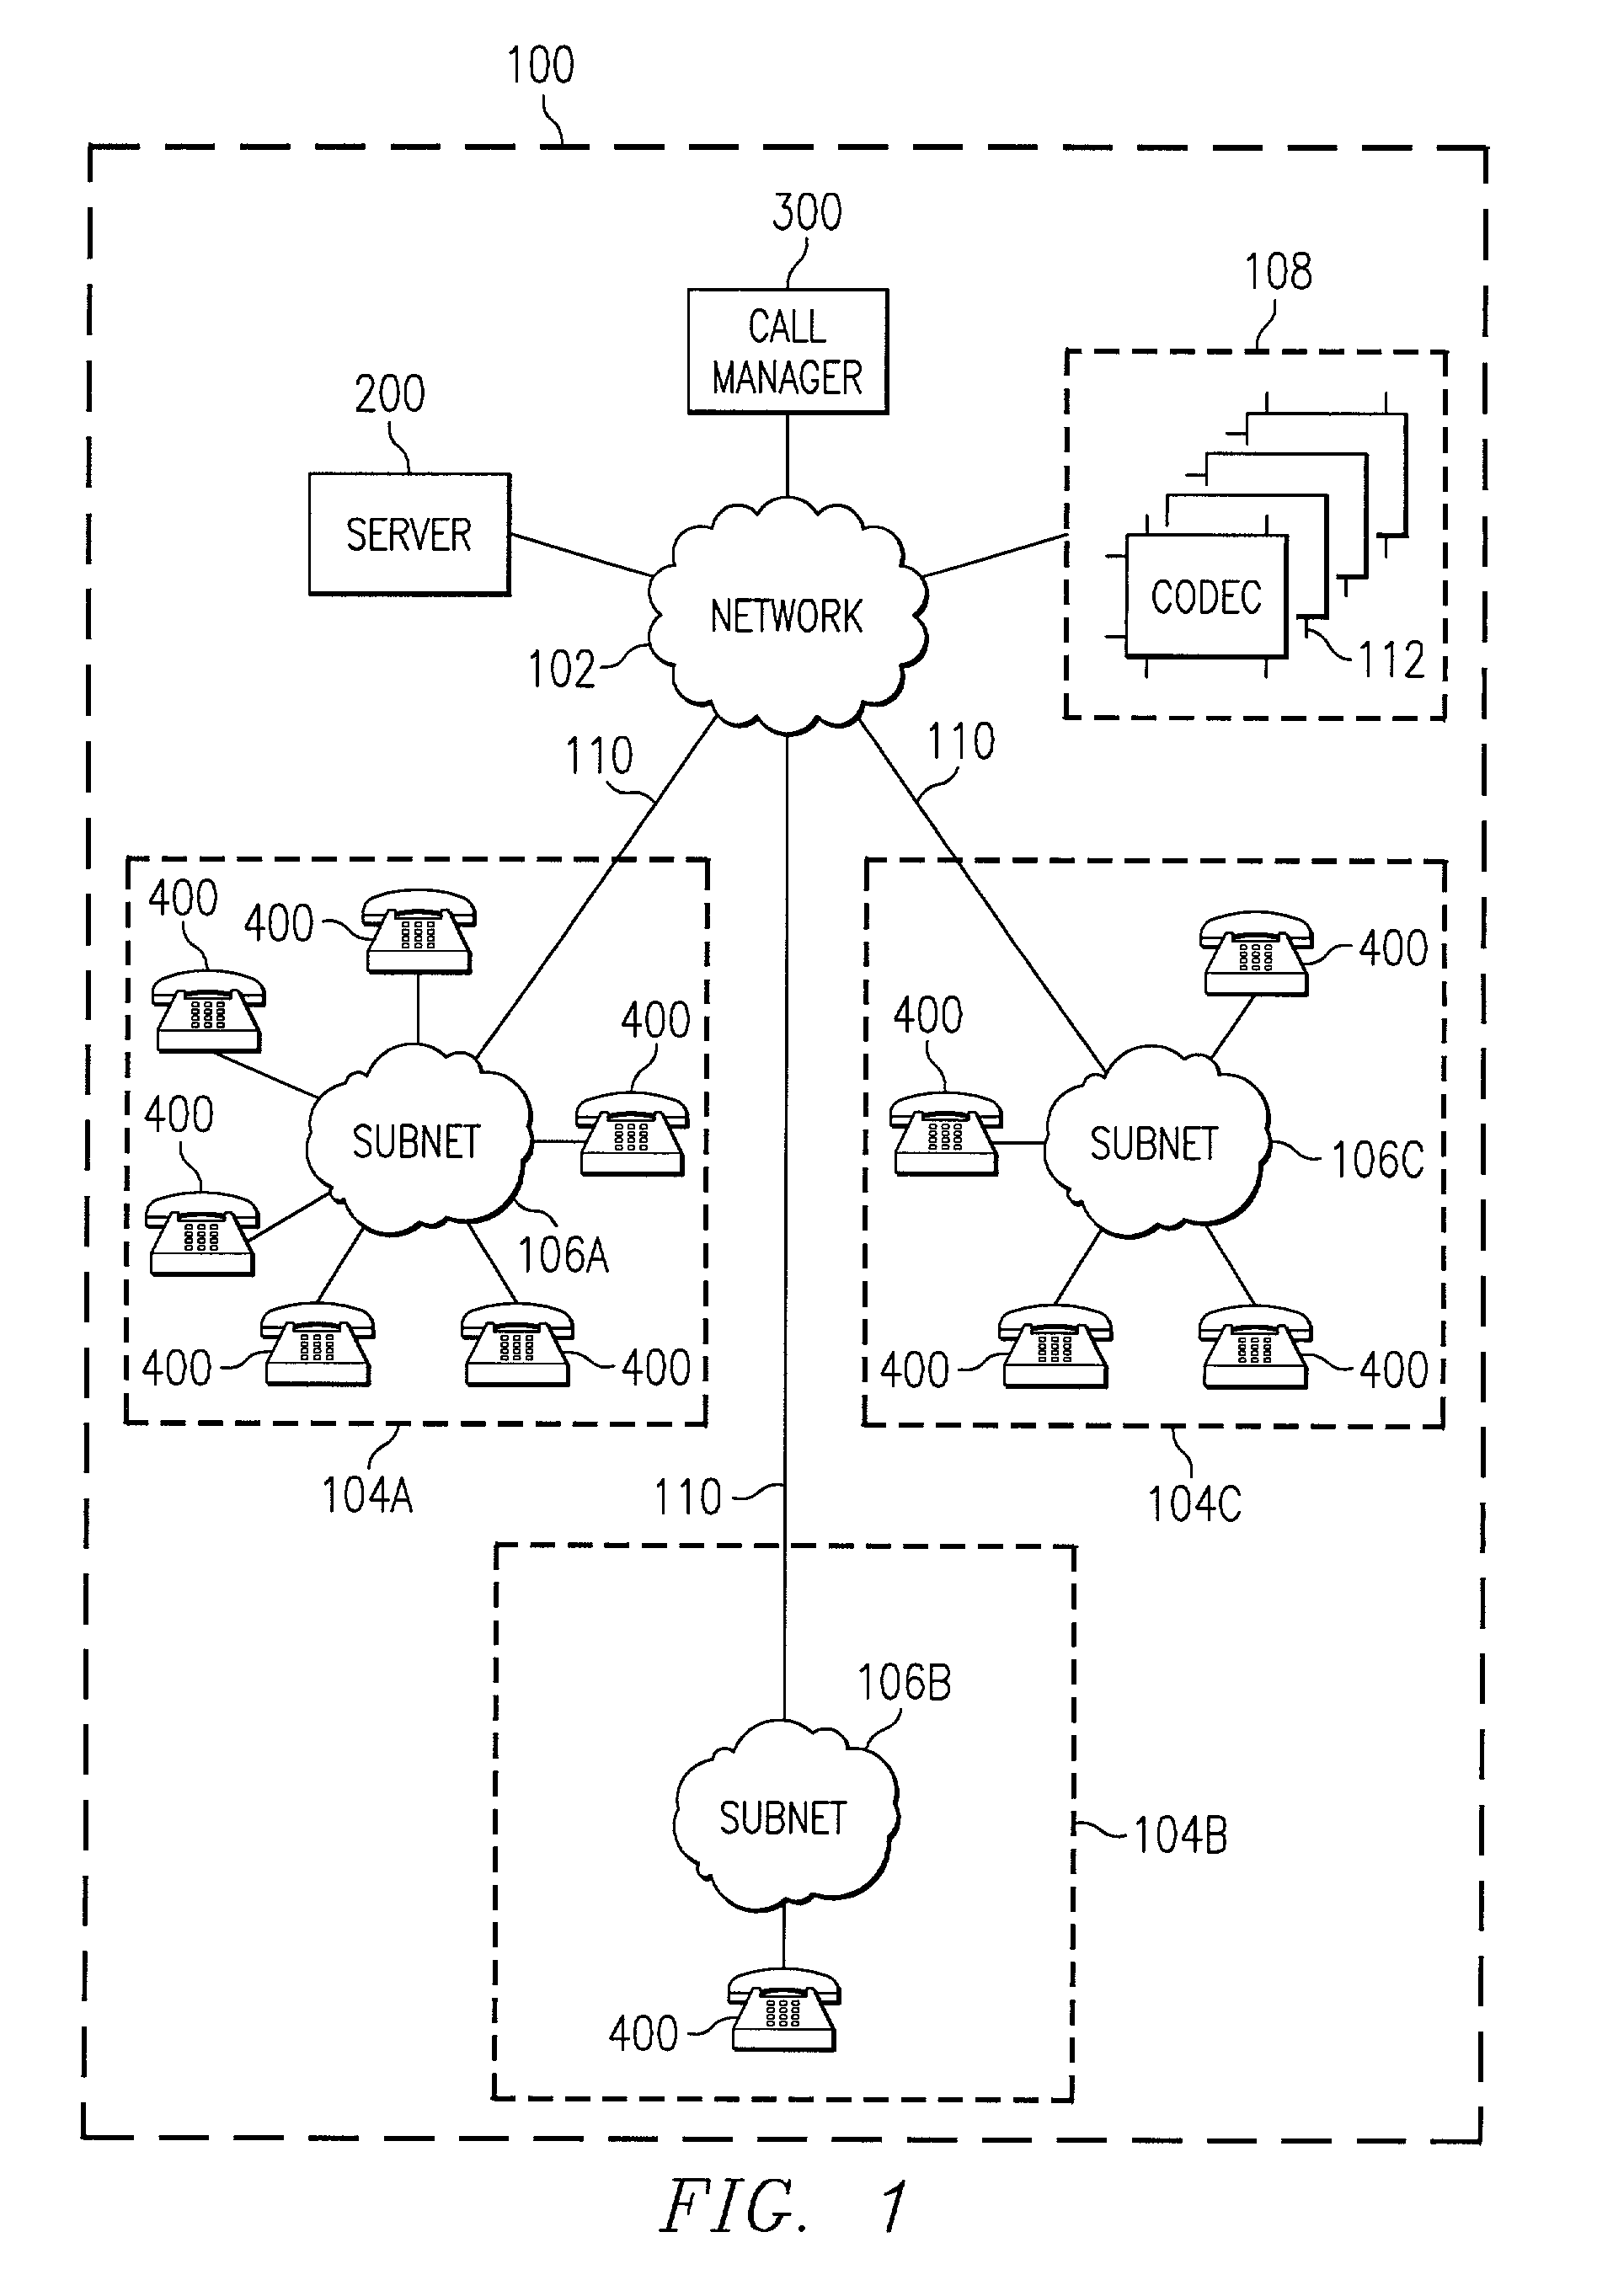 Method and apparatus for dynamically assigning a network endpoint to a network region for selecting a proper codec